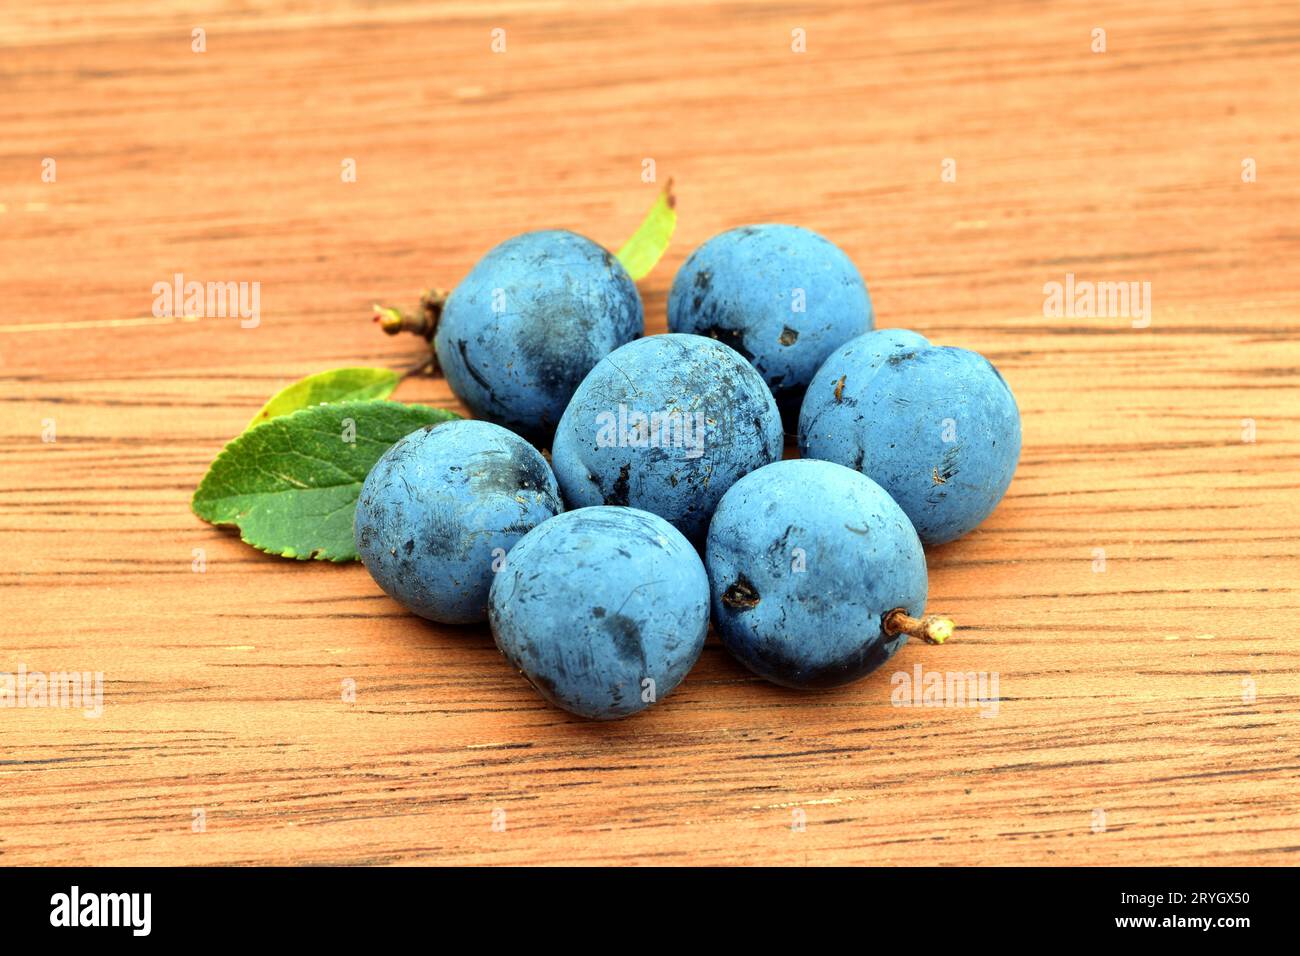 Fruits of the damson (Prunus domestica subsp. insititia or Prunus insititia) on a wooden table. Stock Photo